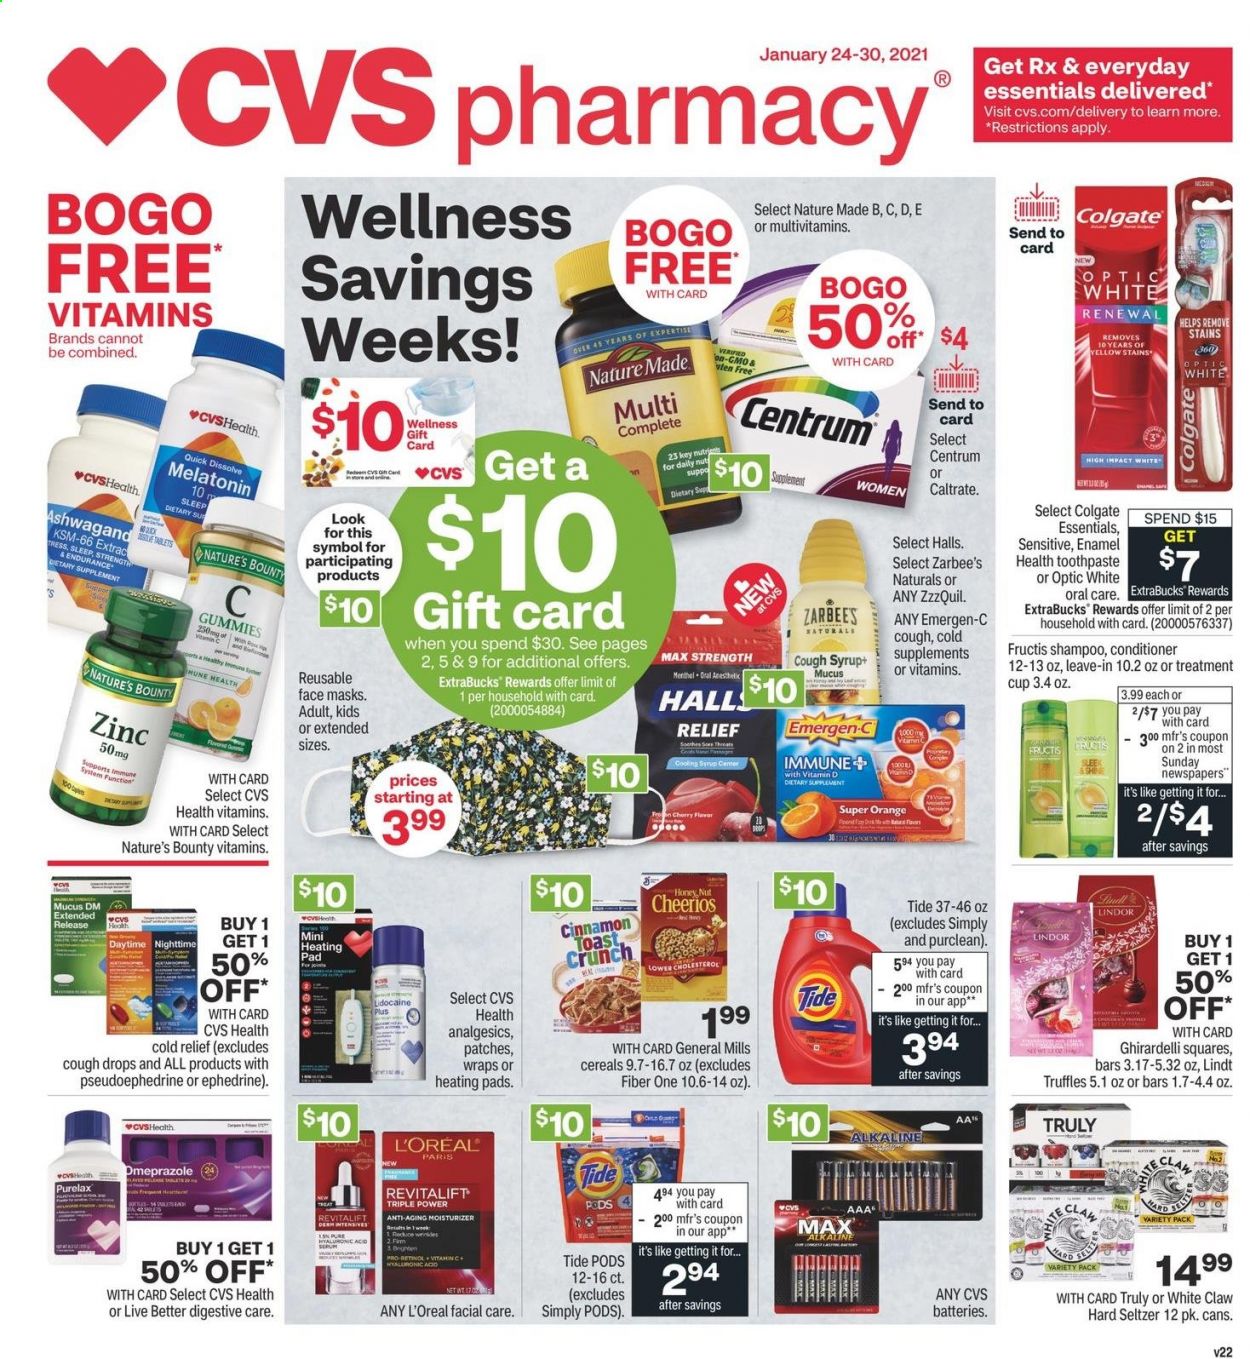 thumbnail - CVS Pharmacy Flyer - 01/31/2021 - 02/06/2021 - Sales products - Halls, Lindt, Lindor, Bounty, truffles, Digestive, Ghirardelli, cereals, Cheerios, Fiber One, seltzer water, White Claw, Hard Seltzer, TRULY, Tide, shampoo, Colgate, toothpaste, Purelax, L’Oréal, moisturizer, conditioner, Fructis, battery, heating pad, Melatonin, multivitamin, Nature Made, Nature's Bounty, vitamin c, ZzzQuil, syrup, zinc, Emergen-C, cough drops, Centrum, dietary supplement, face mask. Page 1.